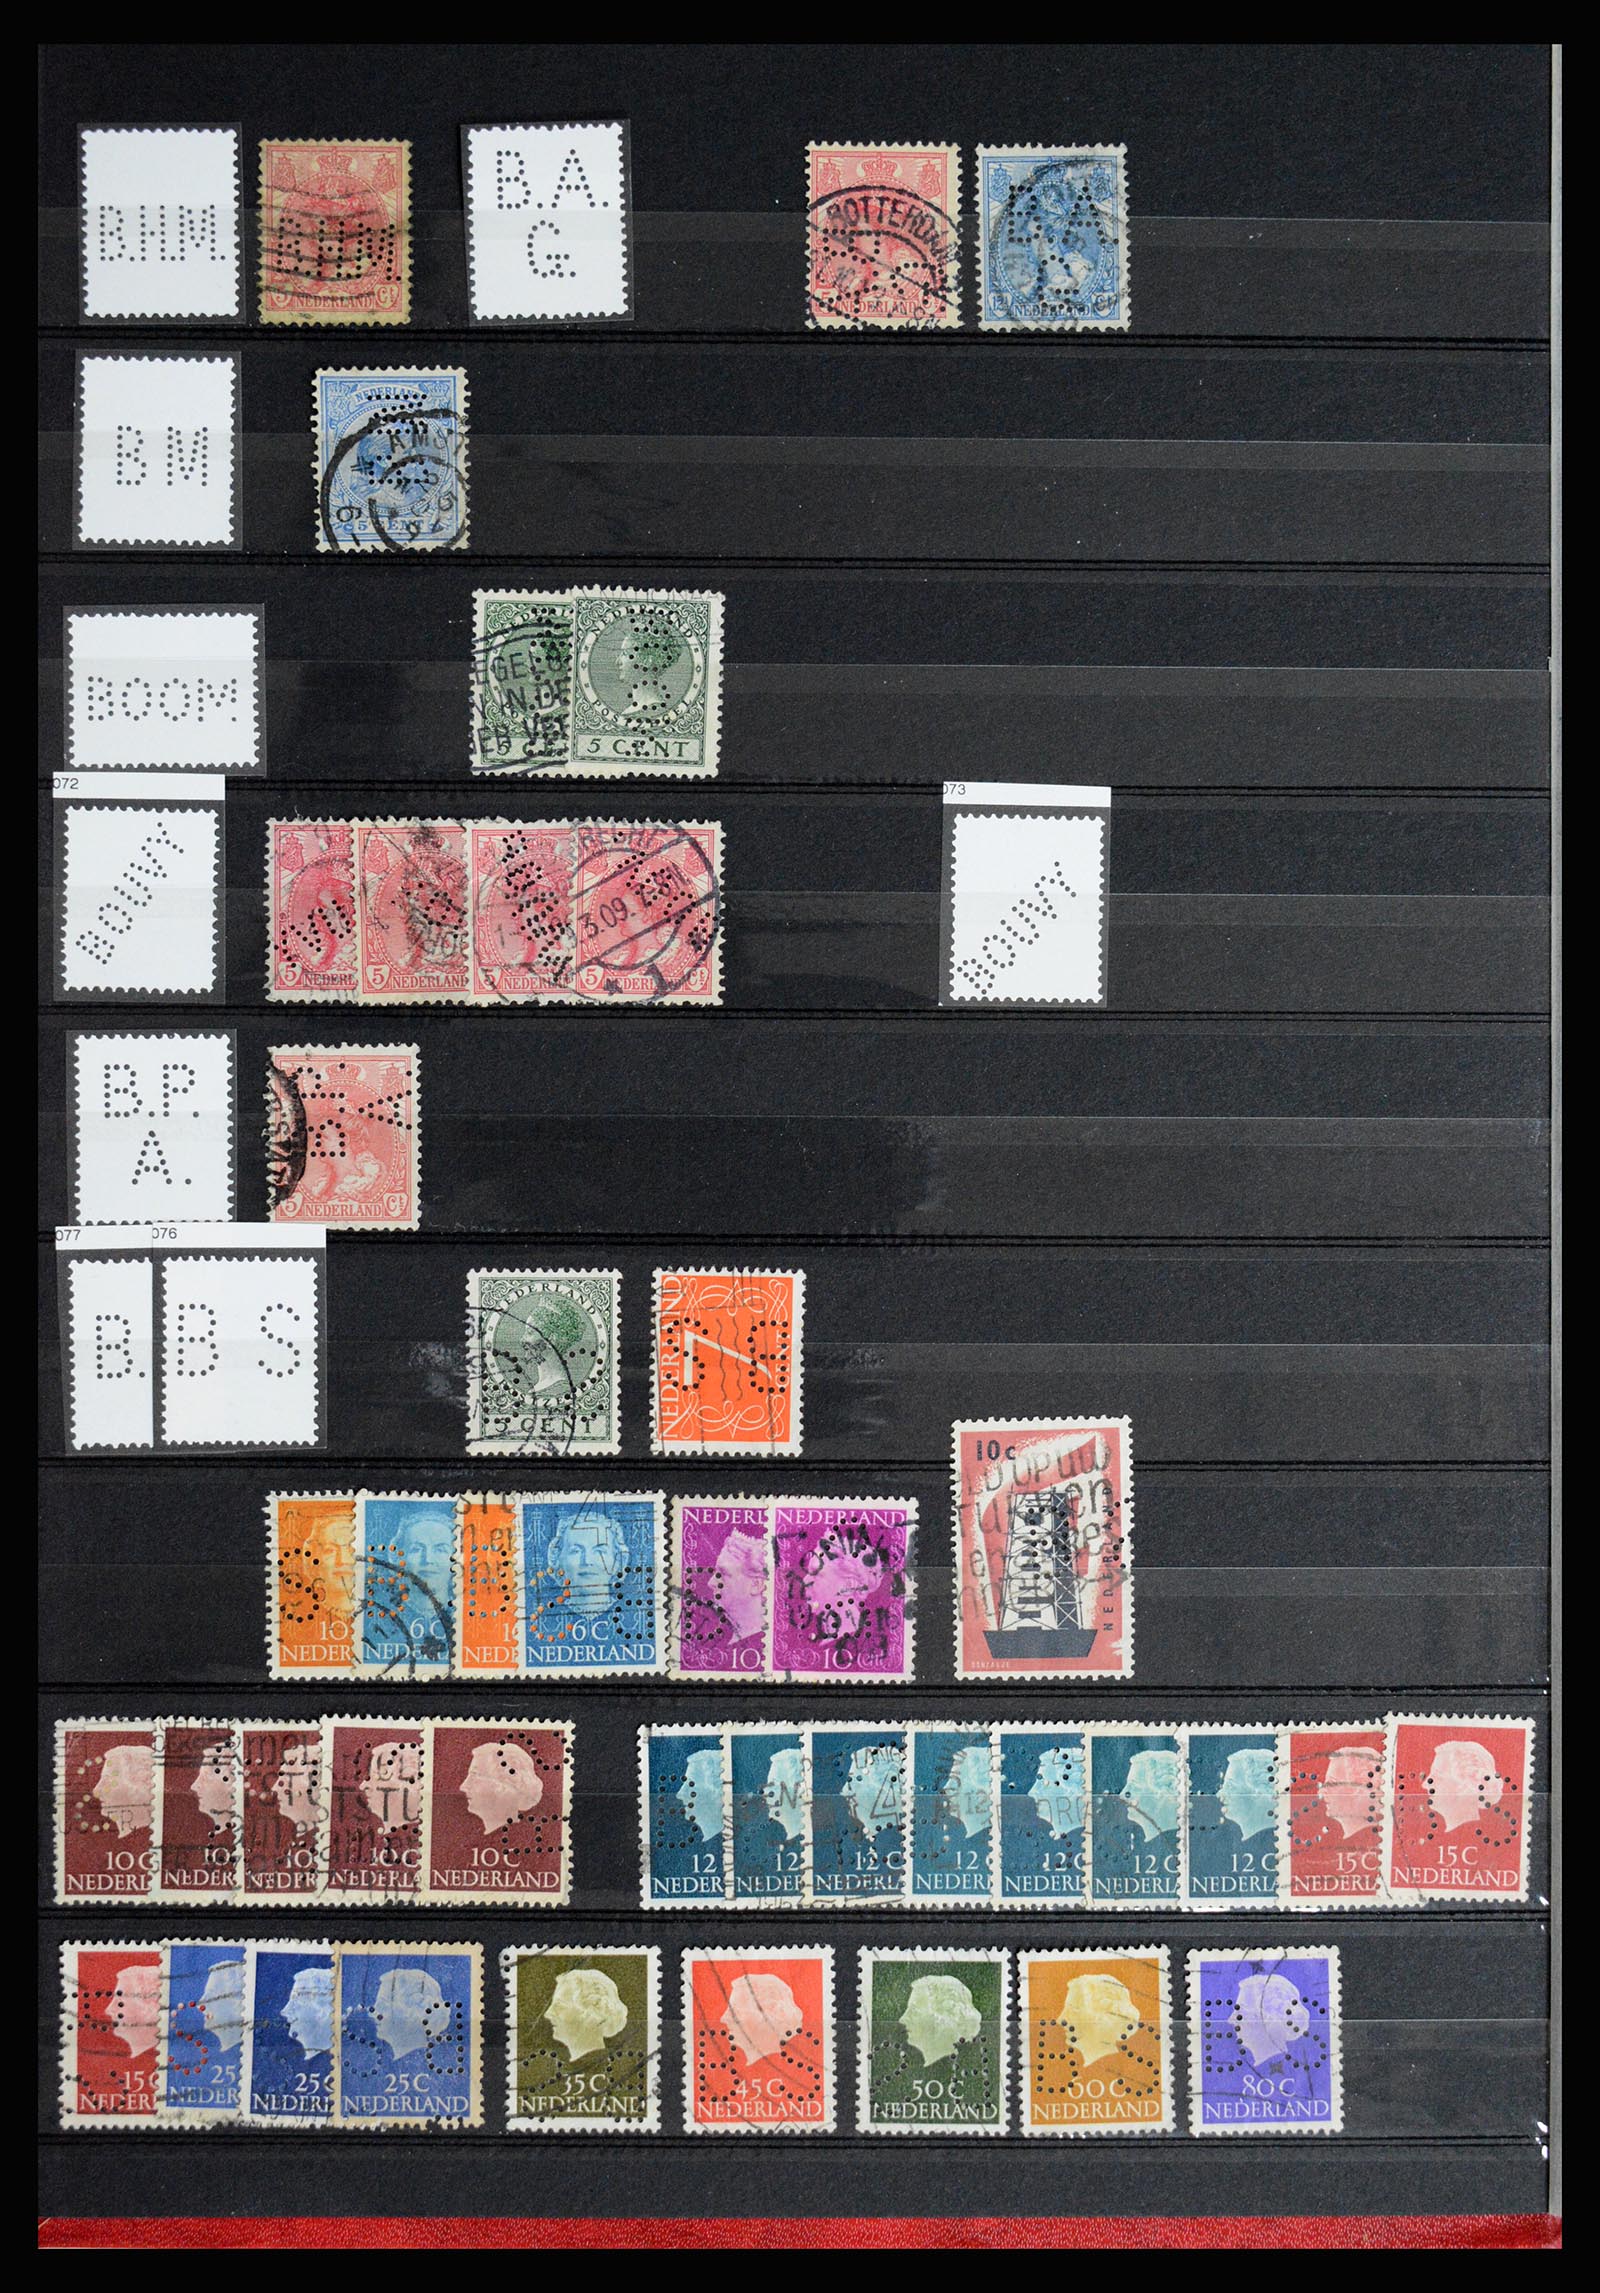 37054 004 - Stamp collection 37054 Netherlands perfins 1890-1960.